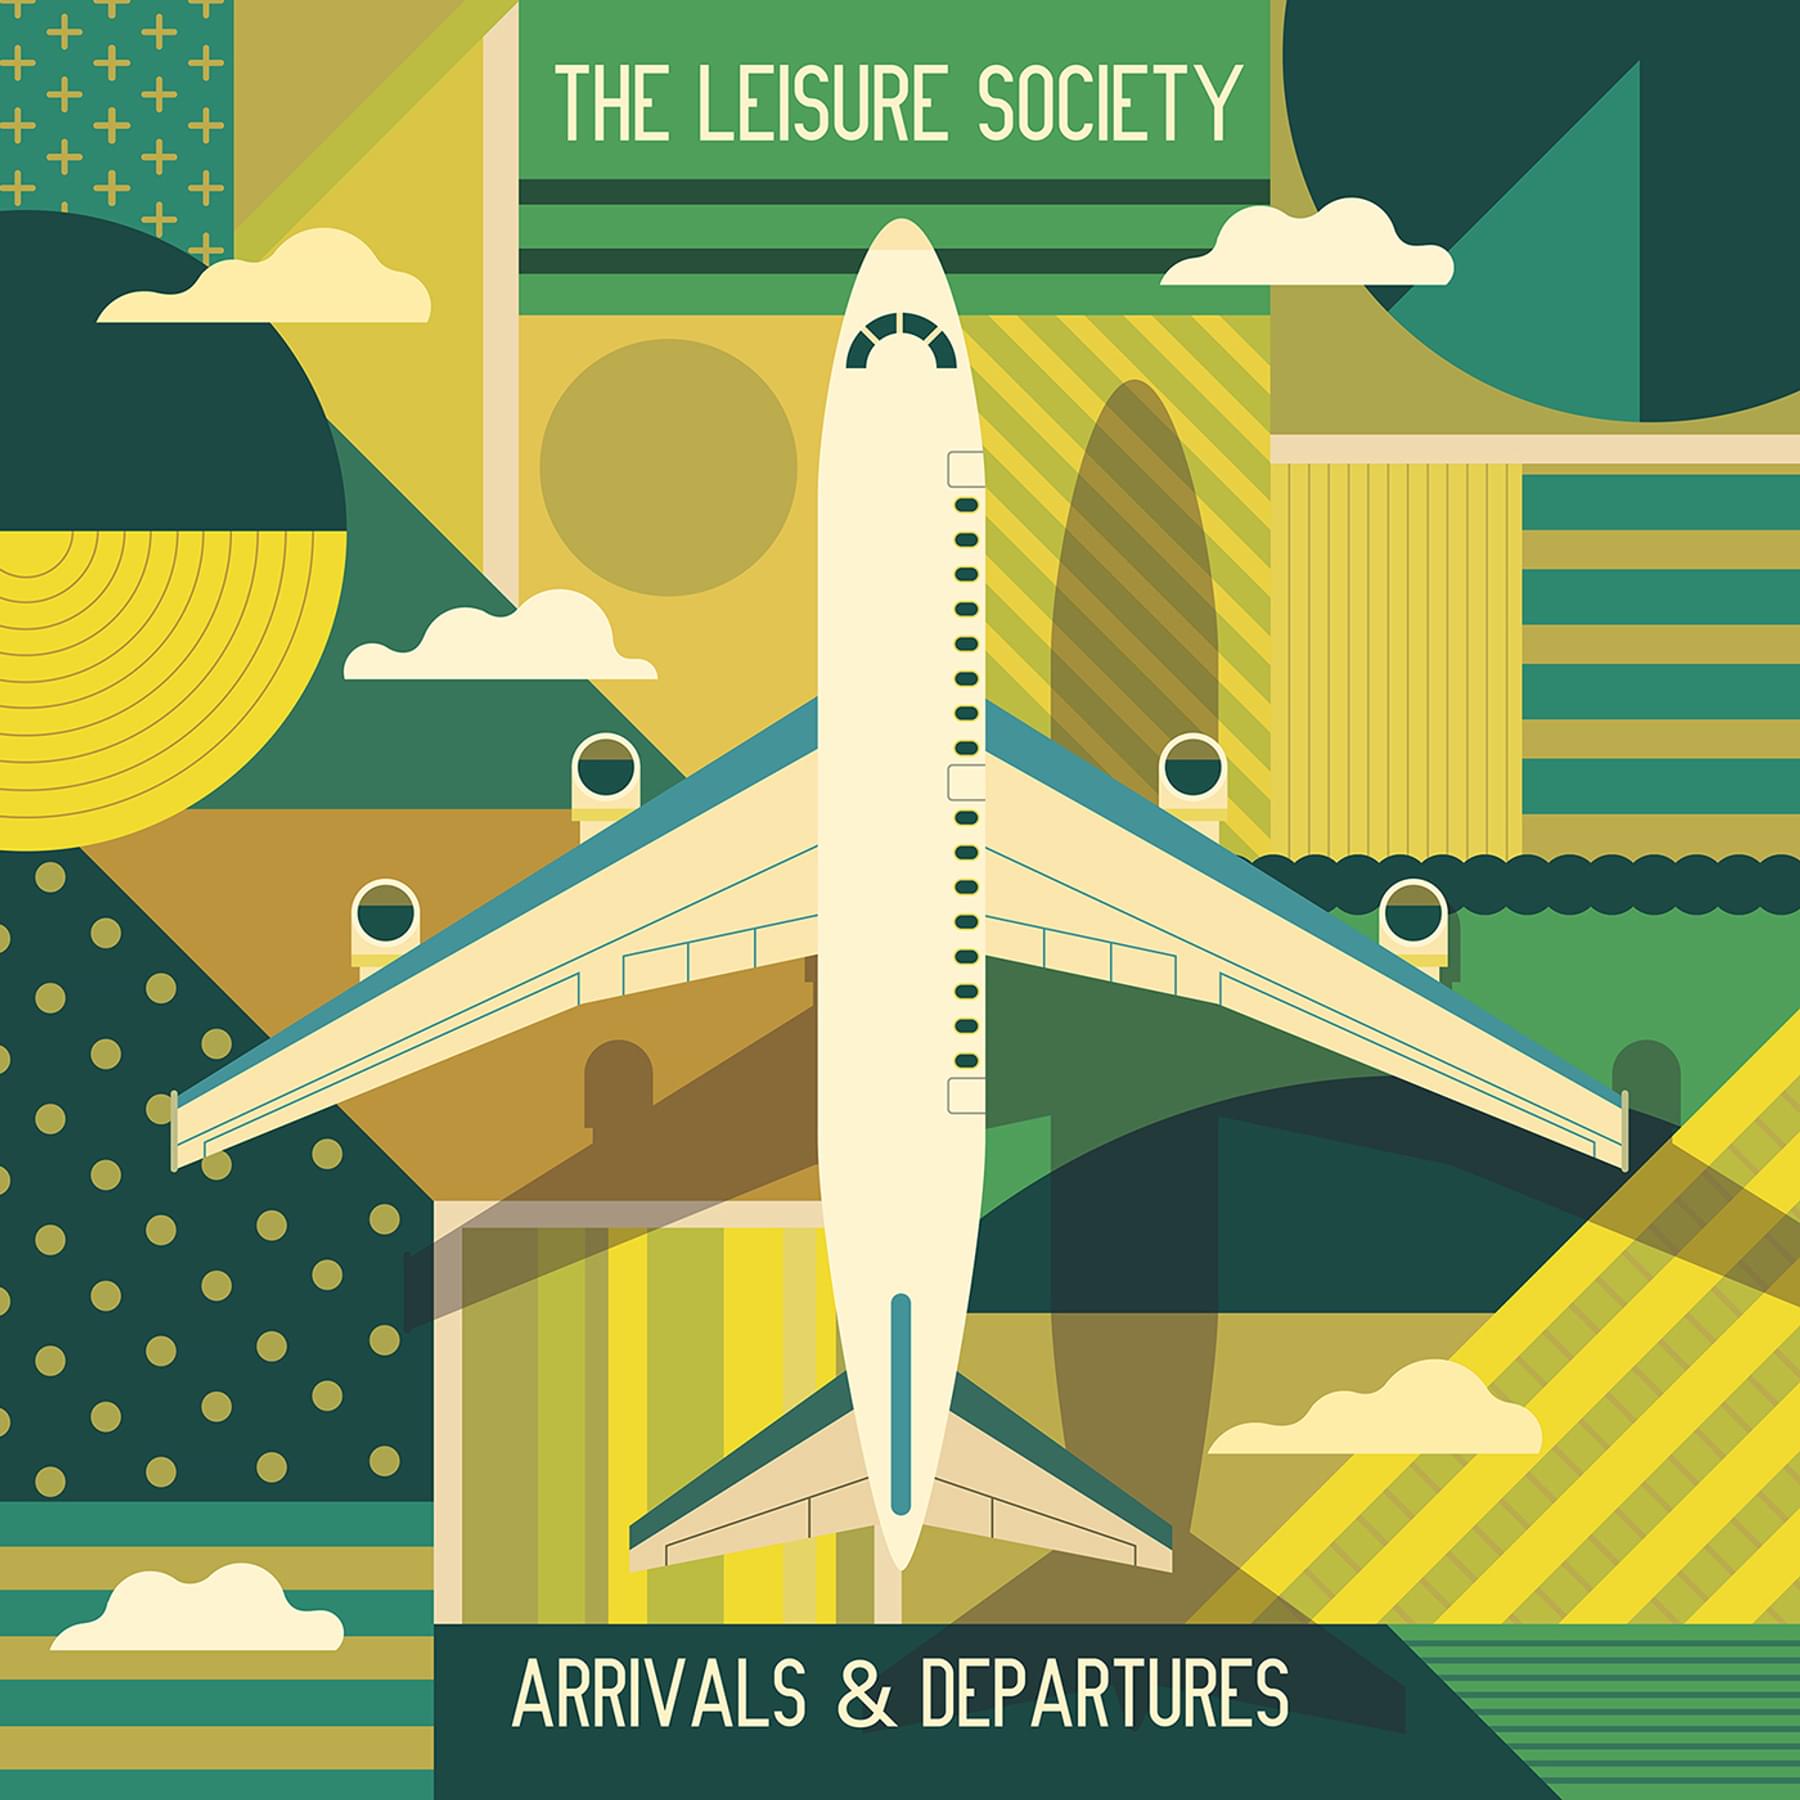 Arrivals & Departures is The Leisure Society's most accomplished album ...